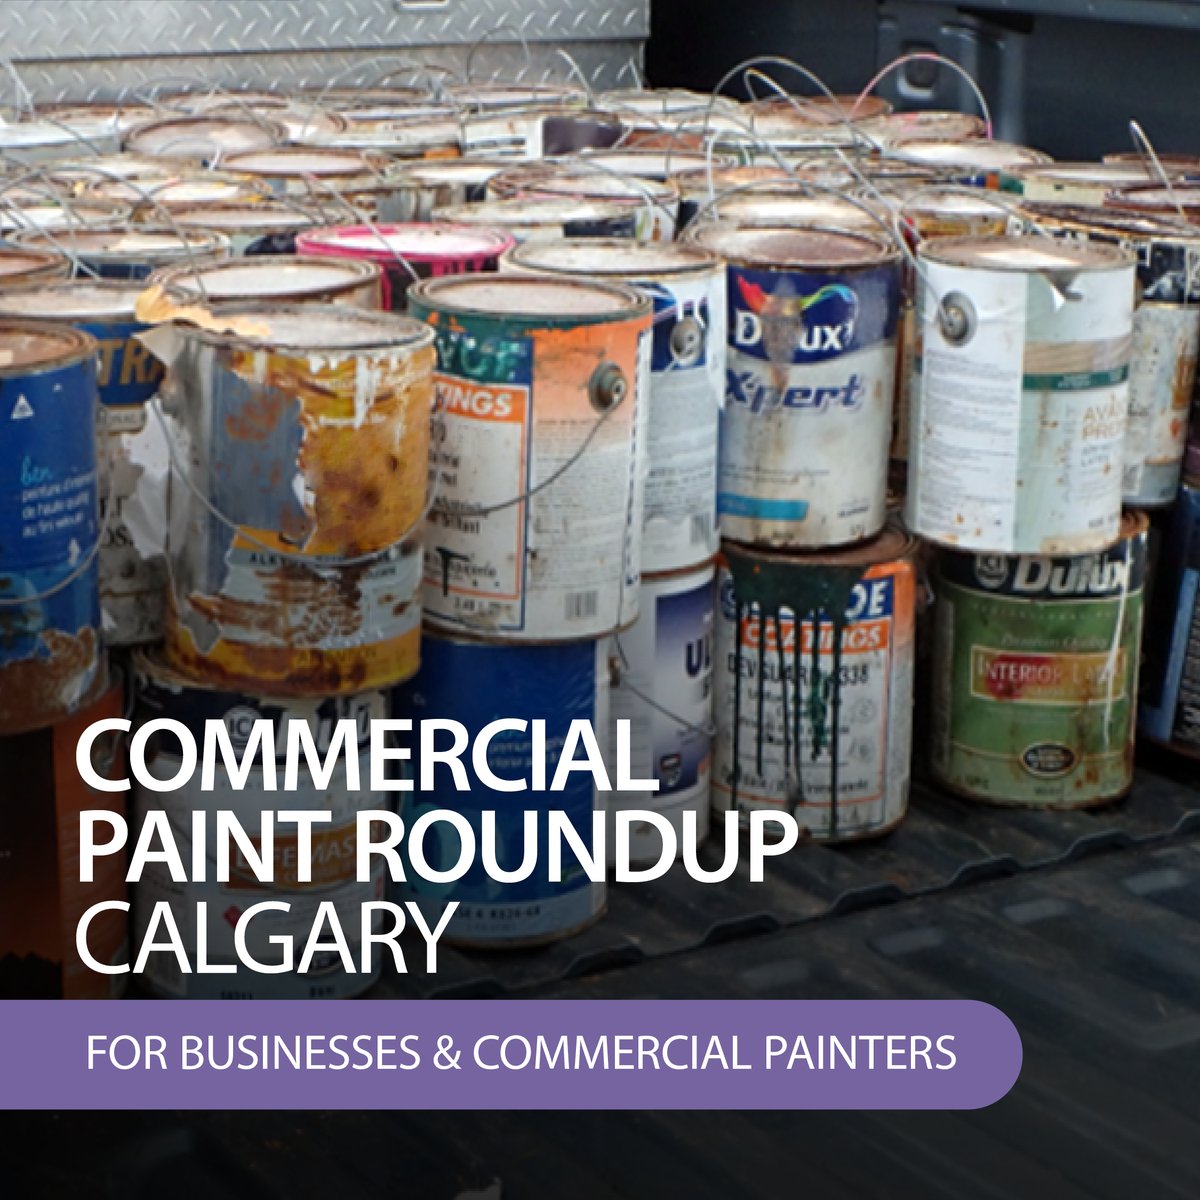 Attention #Calgary #CommercialPainters and #Businesses! We've got two upcoming Commercial Paint Roundups coming up this month so don't miss your chance to get rid of that old paint, spray paint, and empty paint cans. Learn more at bit.ly/3P9h2ew #Paint #YYC